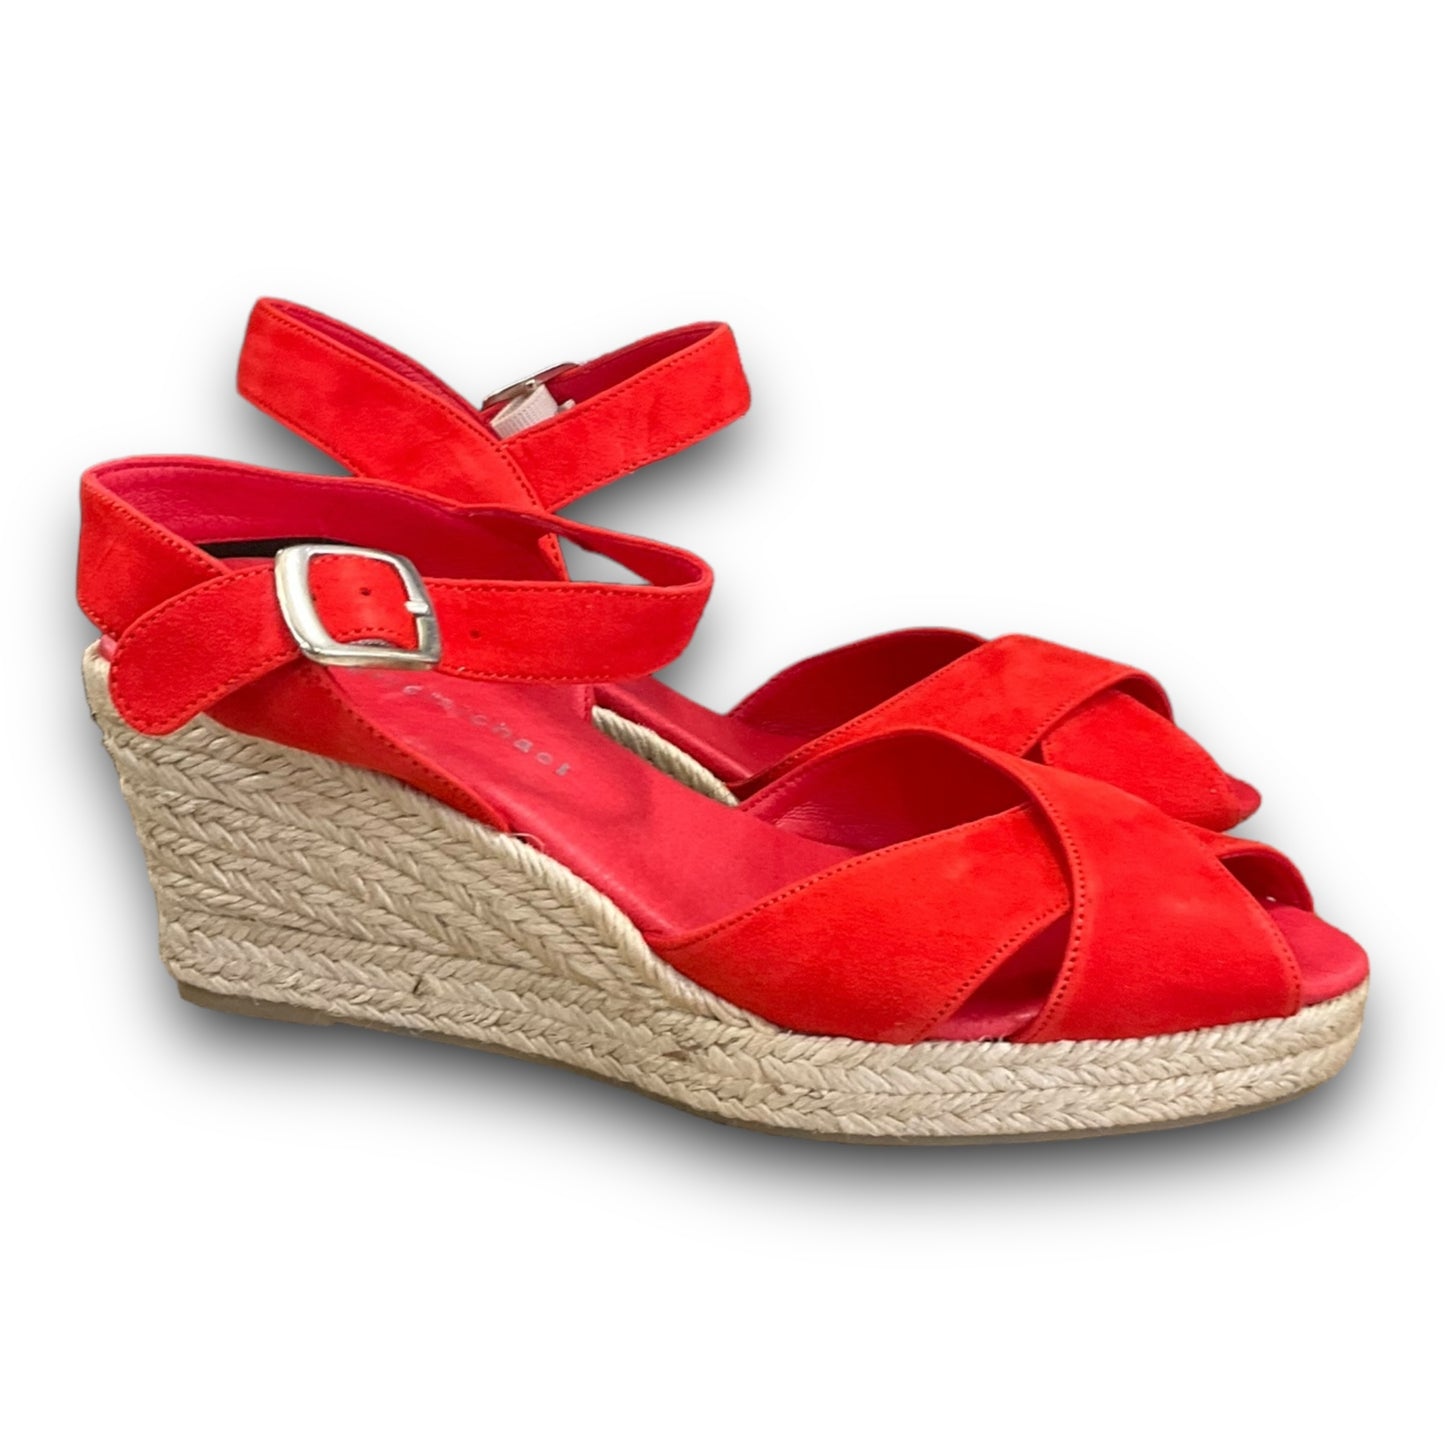 Sandals Heels Wedge By Eric Michael London  Size: 7.5